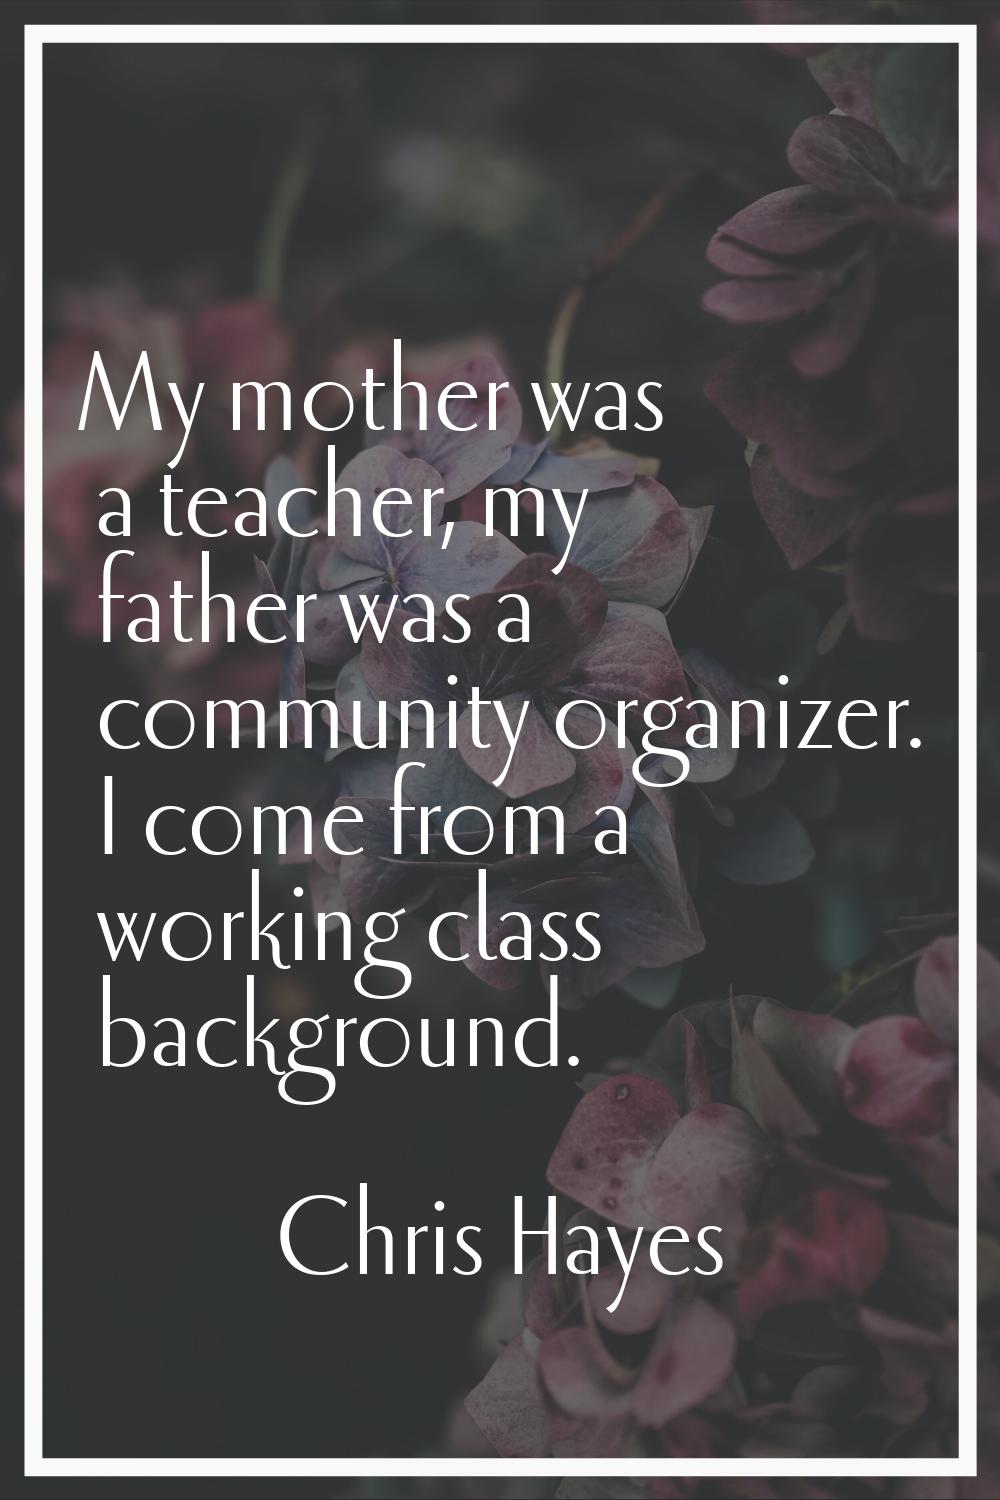 My mother was a teacher, my father was a community organizer. I come from a working class backgroun